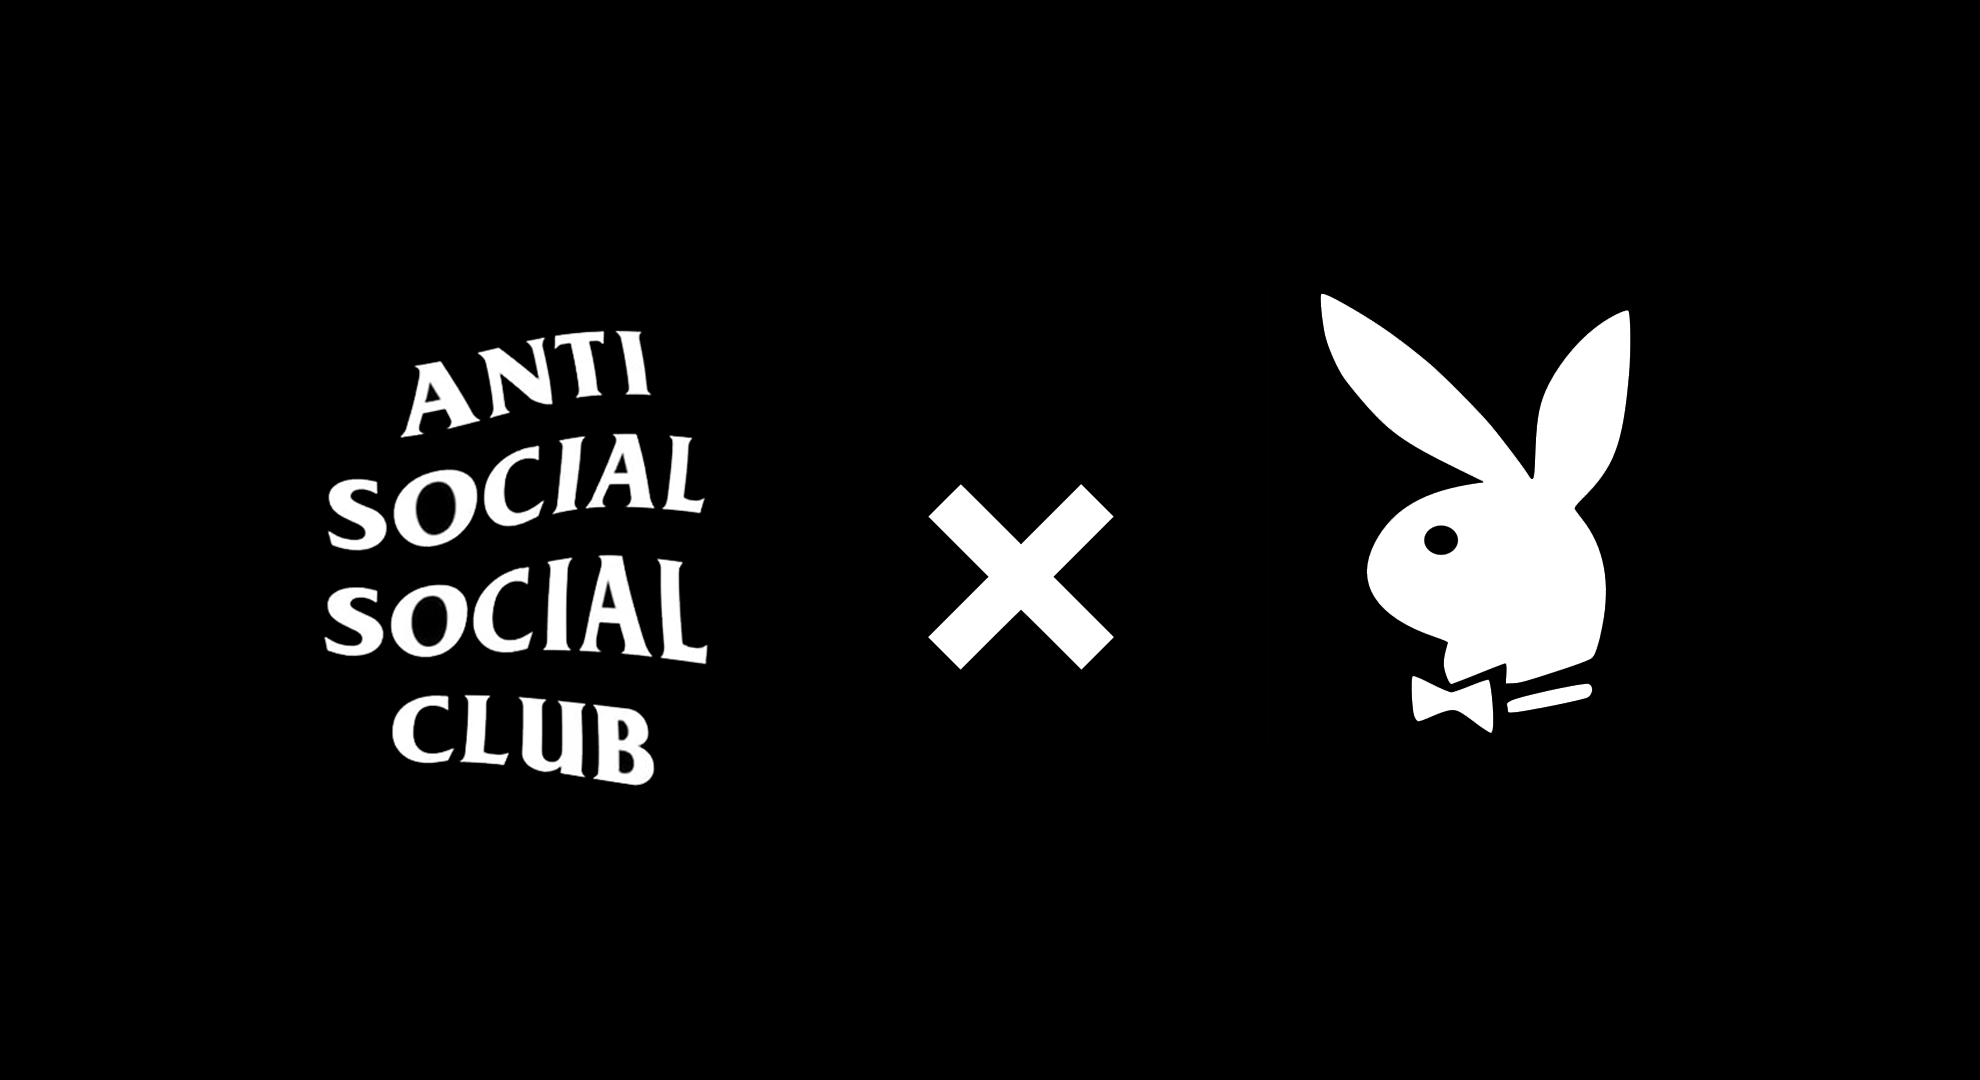 Anti Social Social Club x Playboy Collaboration | Anti Social Social Club x Playboy Collaboration. The collaboration between Anti Social Social Club and Playboy is finally here. The collection features a range of classic Anti Social Social Club designs with a playful twist. - Anti Social Social Club